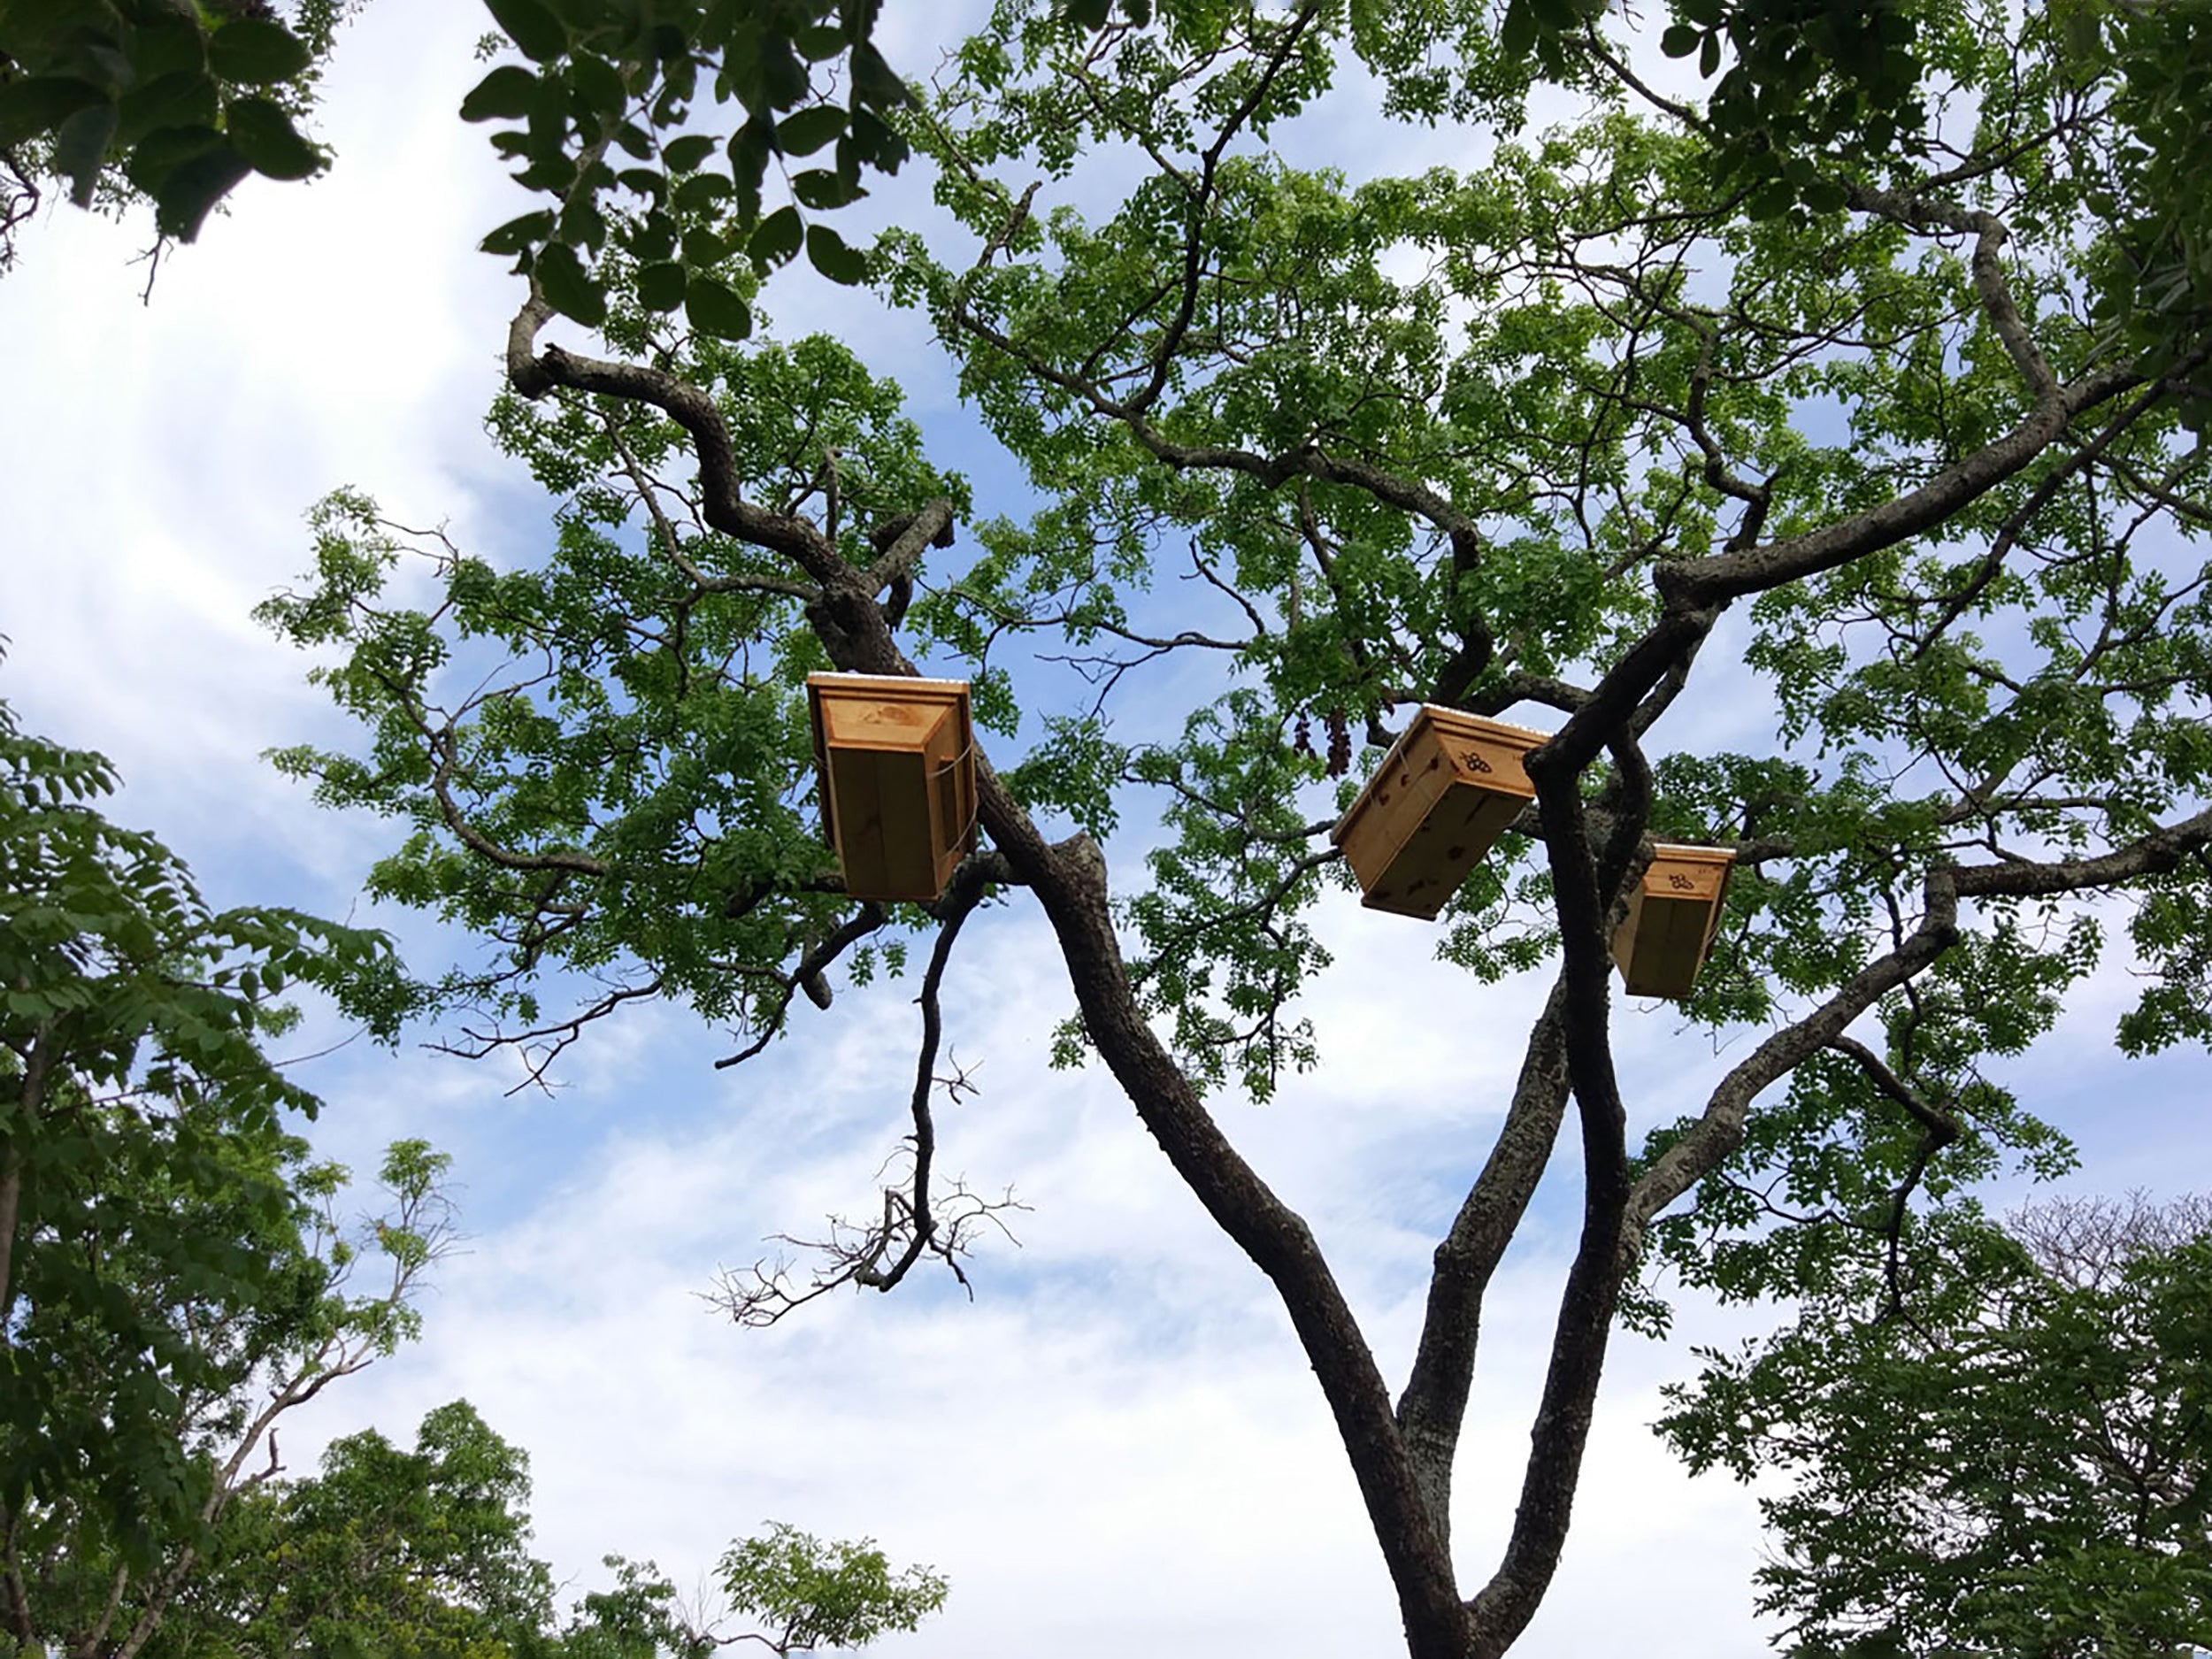 Beehives in tree canopies